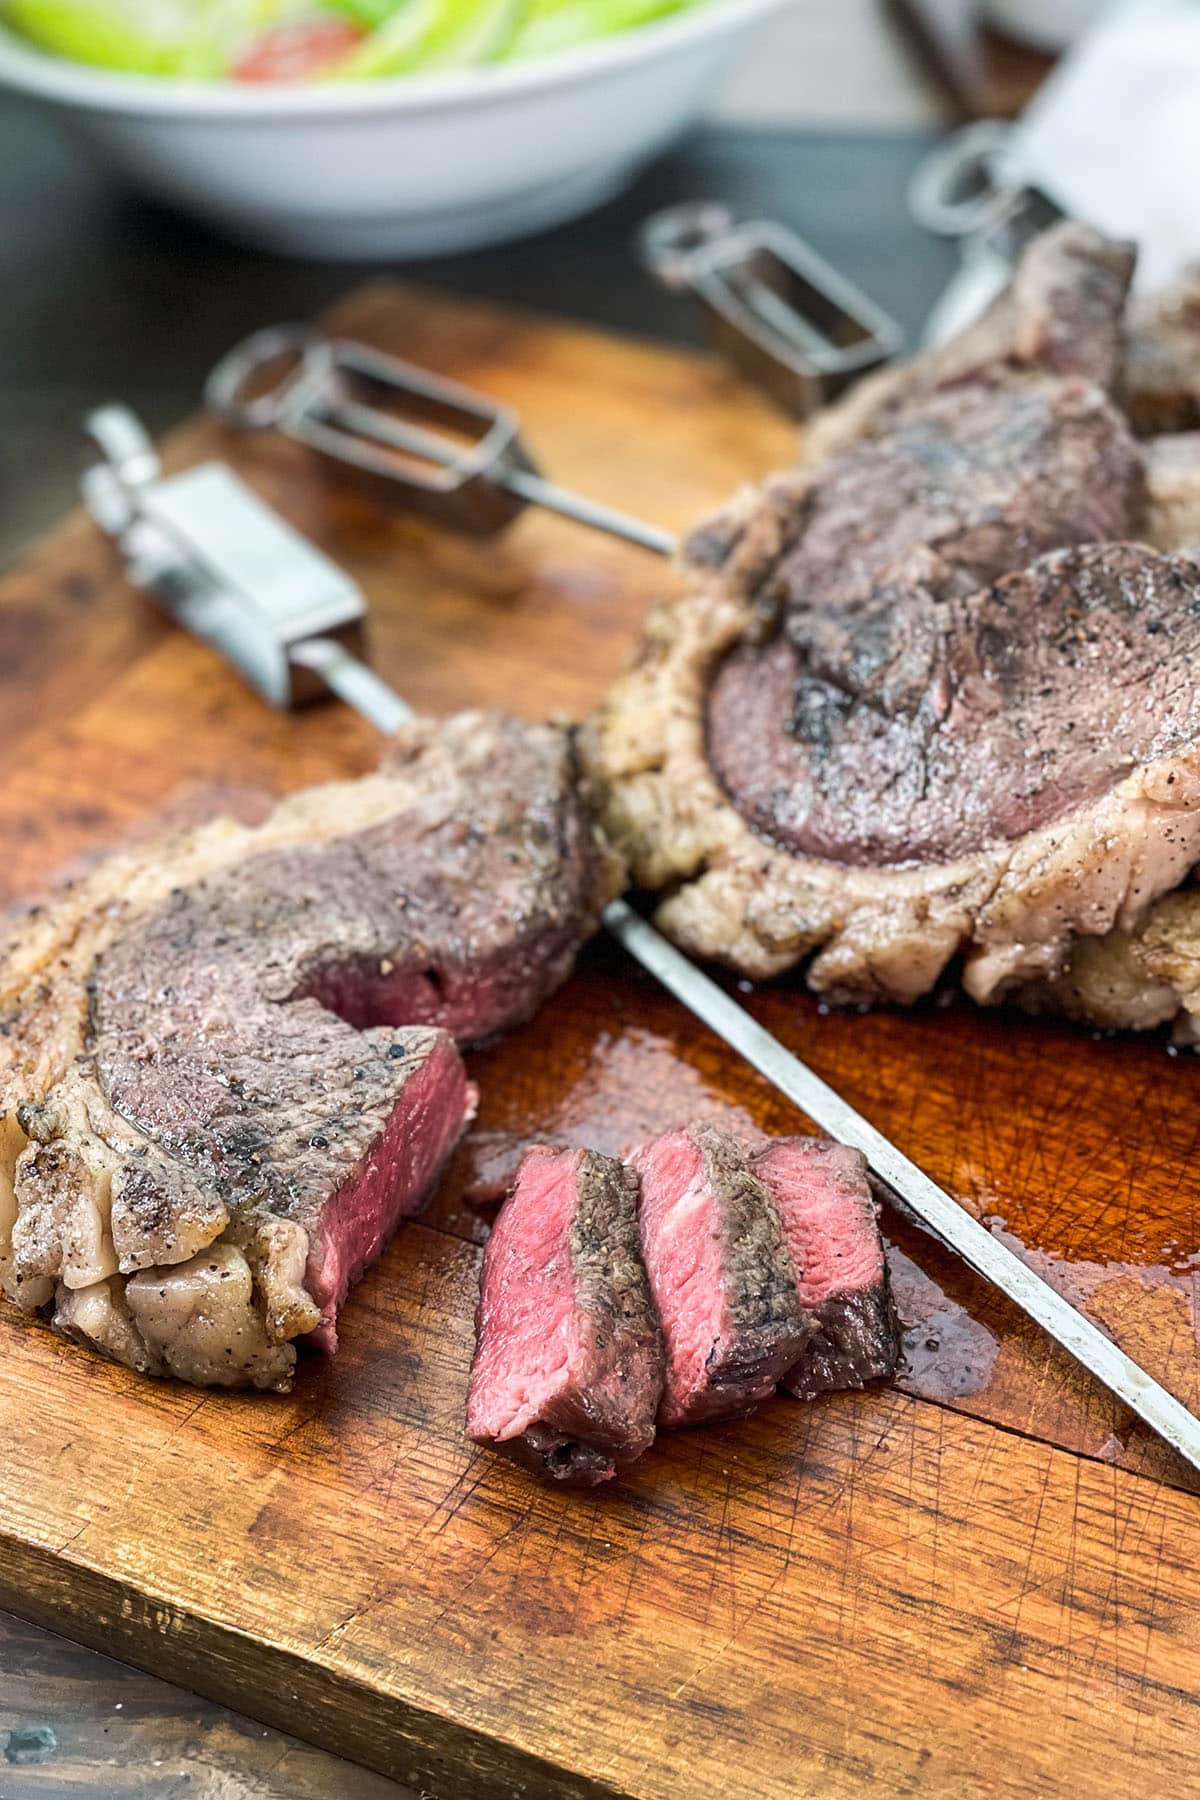 How to Cook Picanha Steak